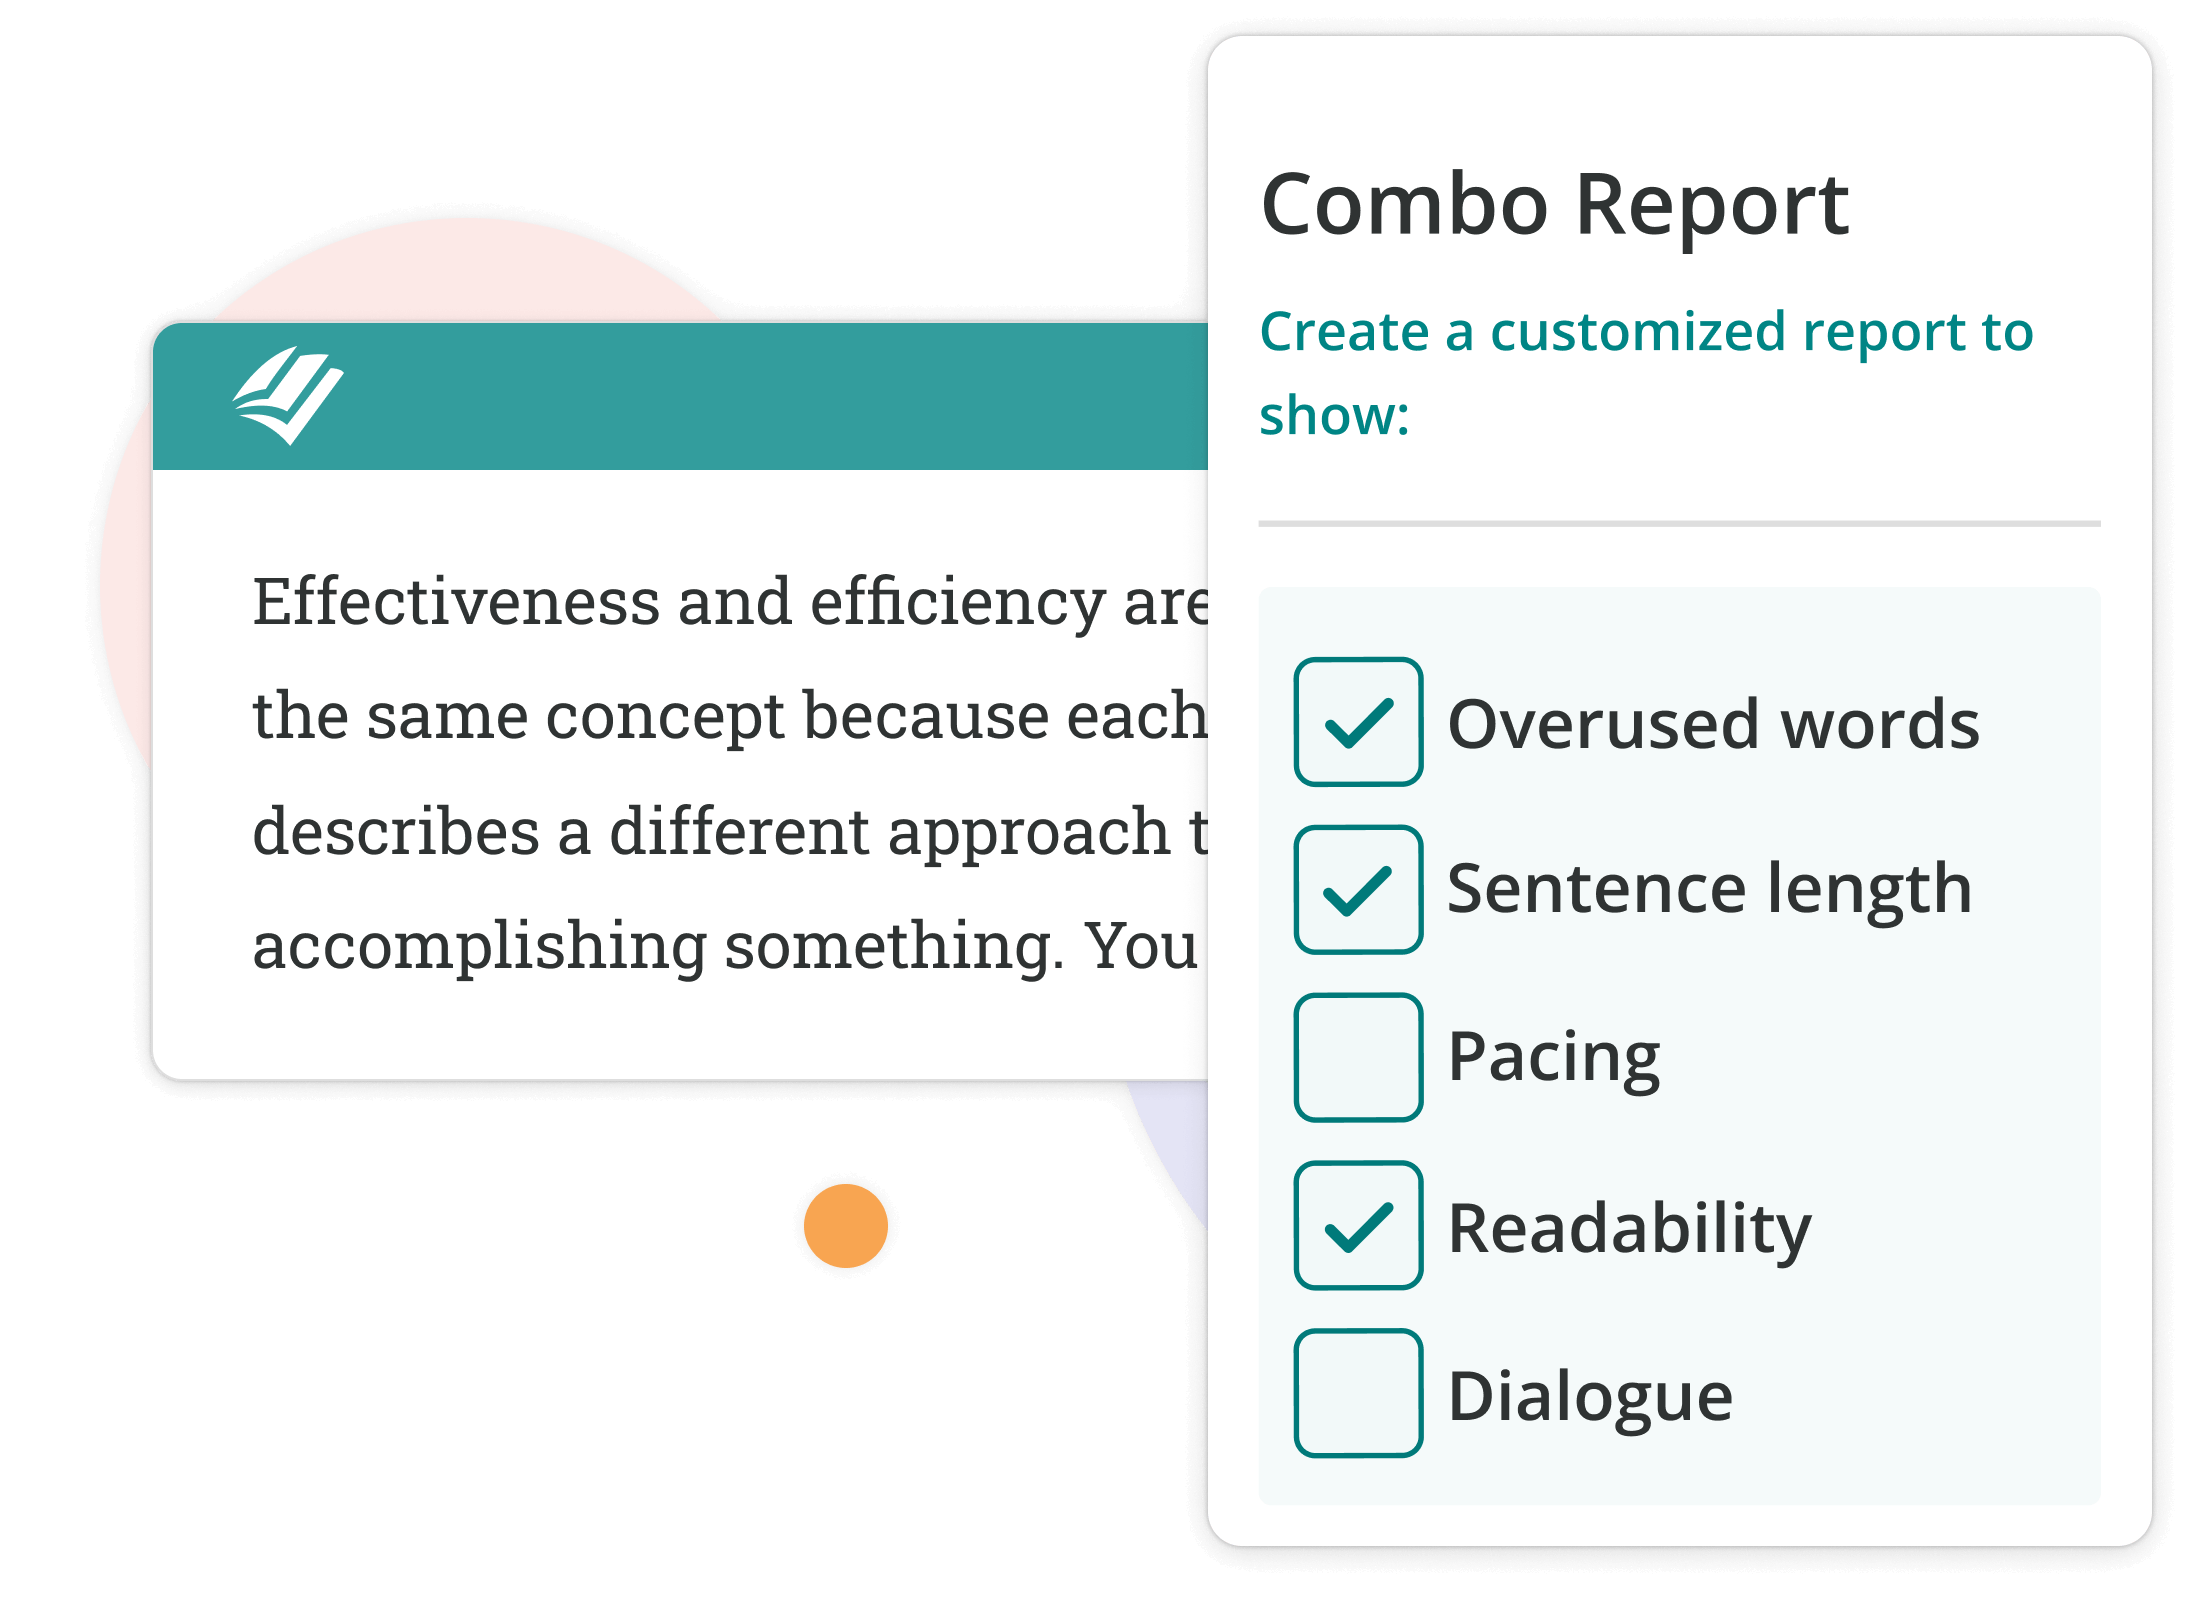 The Combo Report